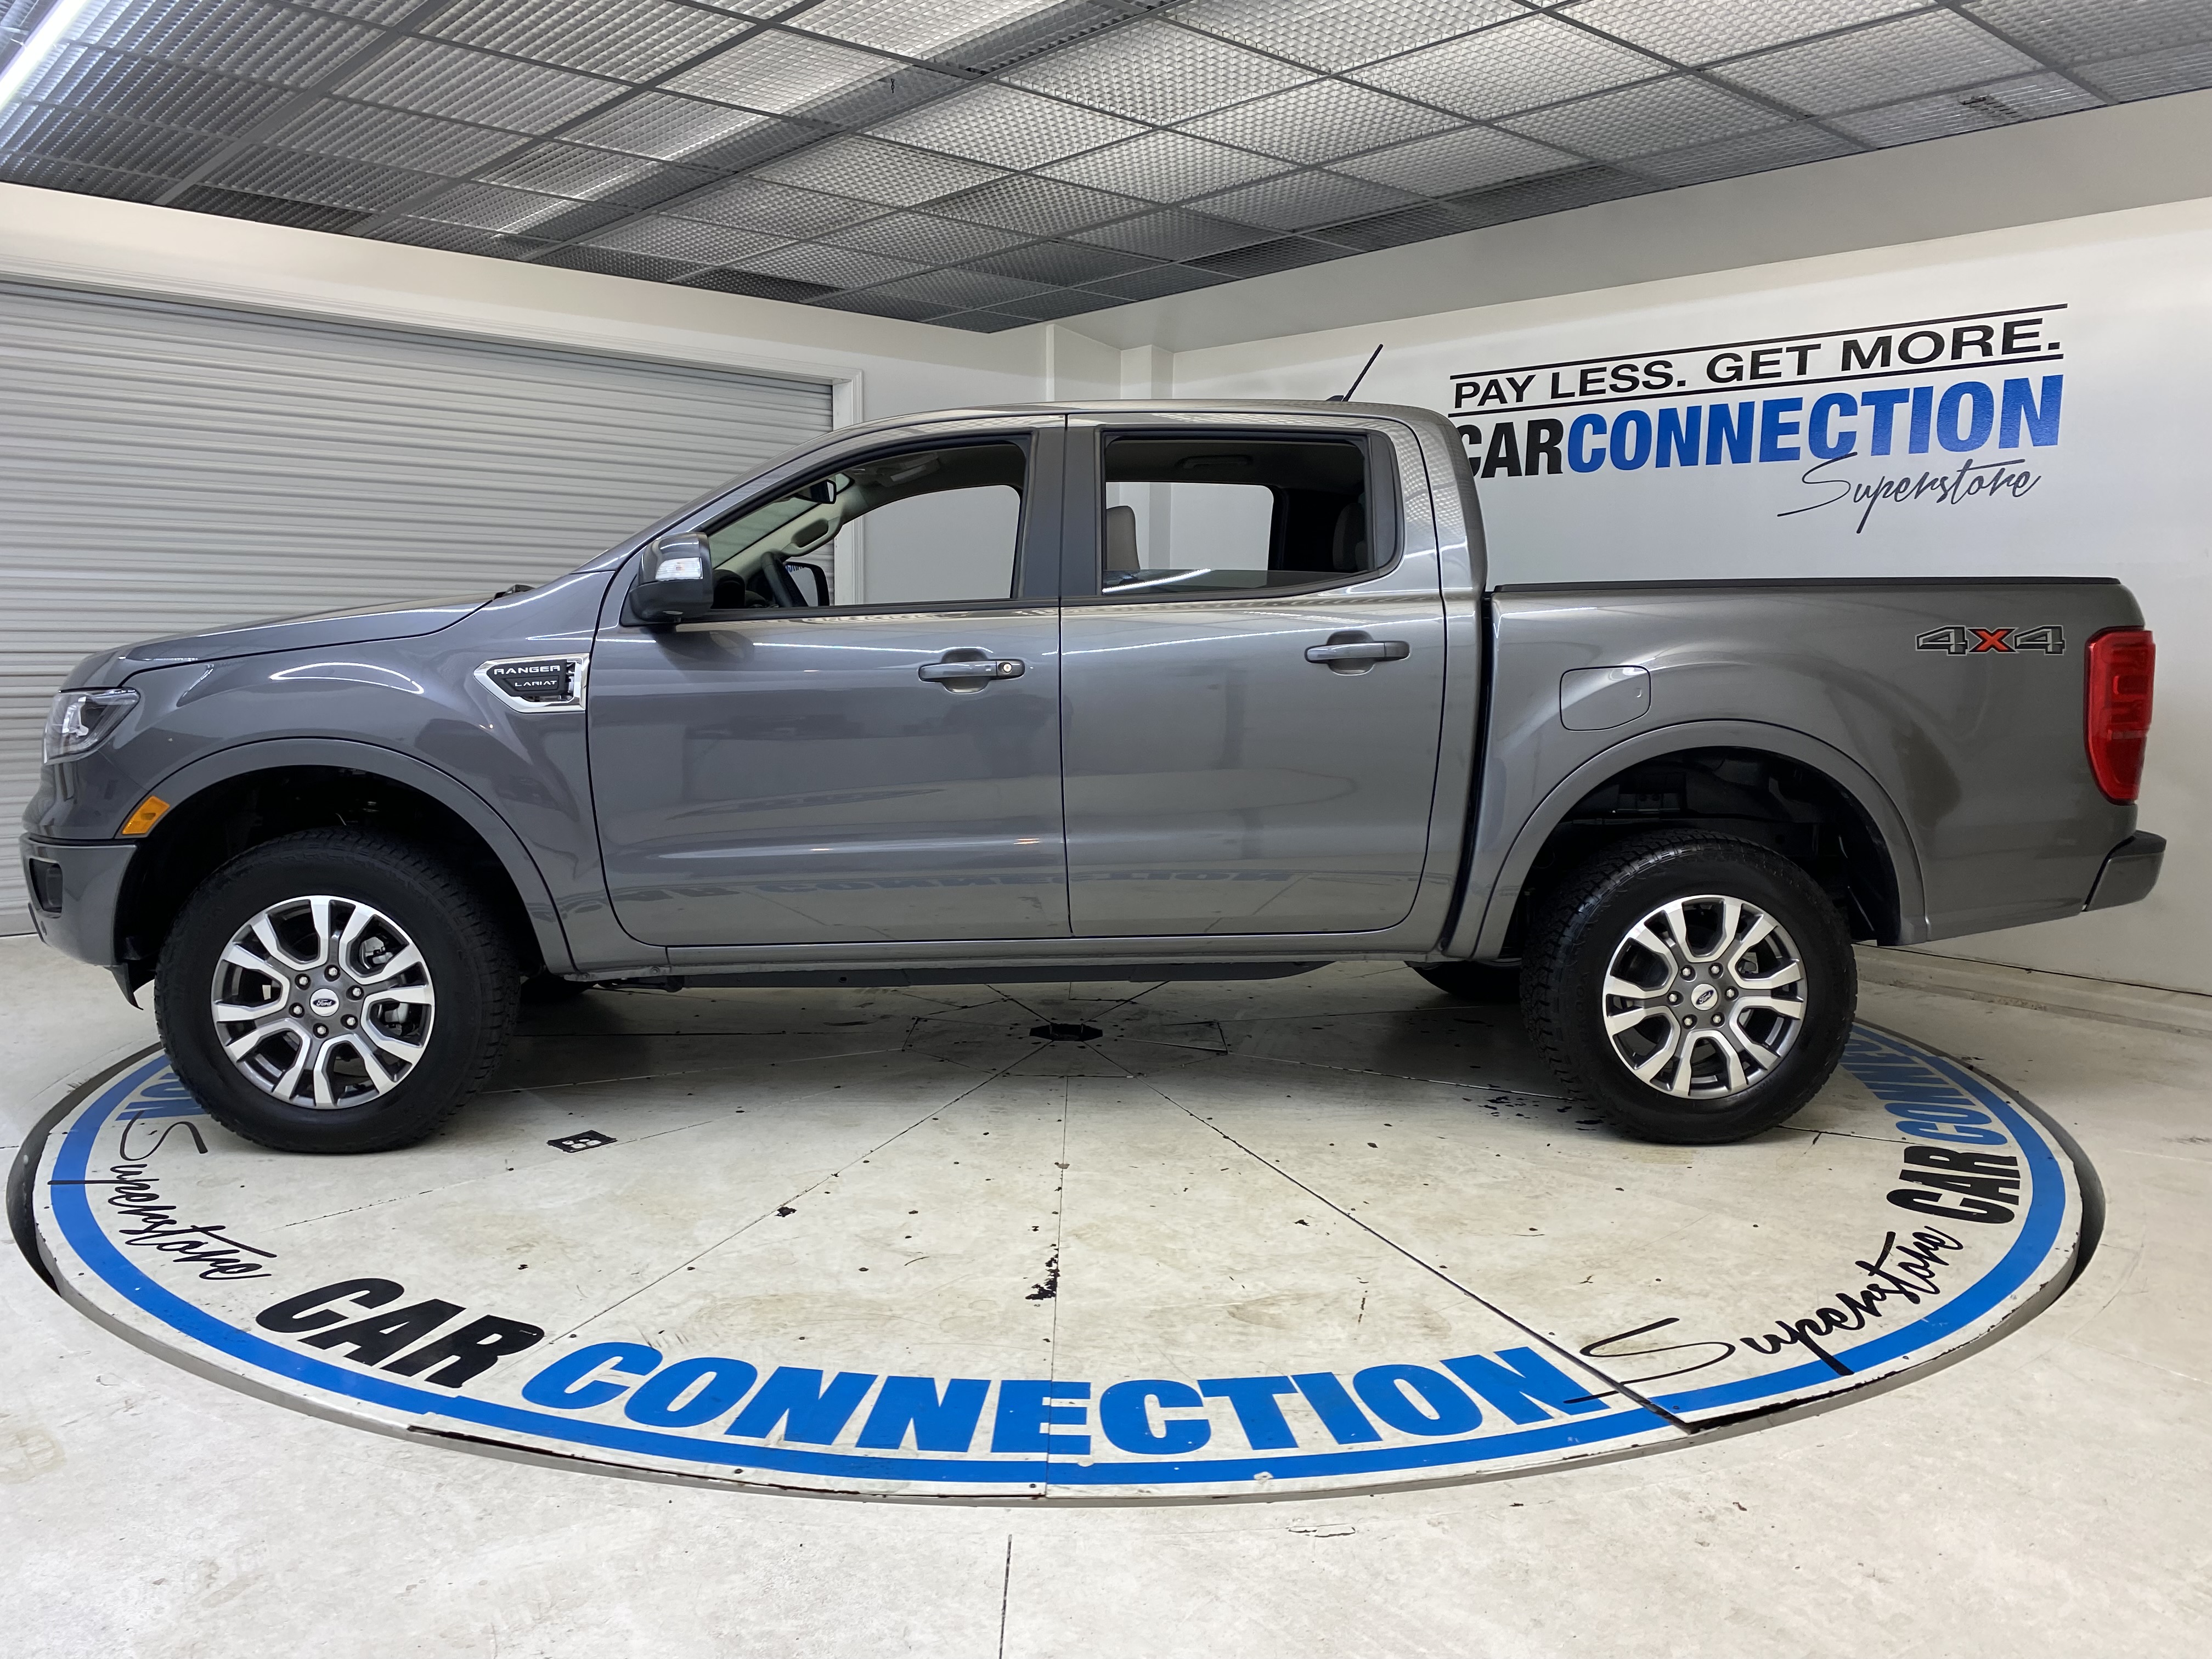 Car Connection Superstore - Used vehicle - Truck FORD Ranger Crew 2021